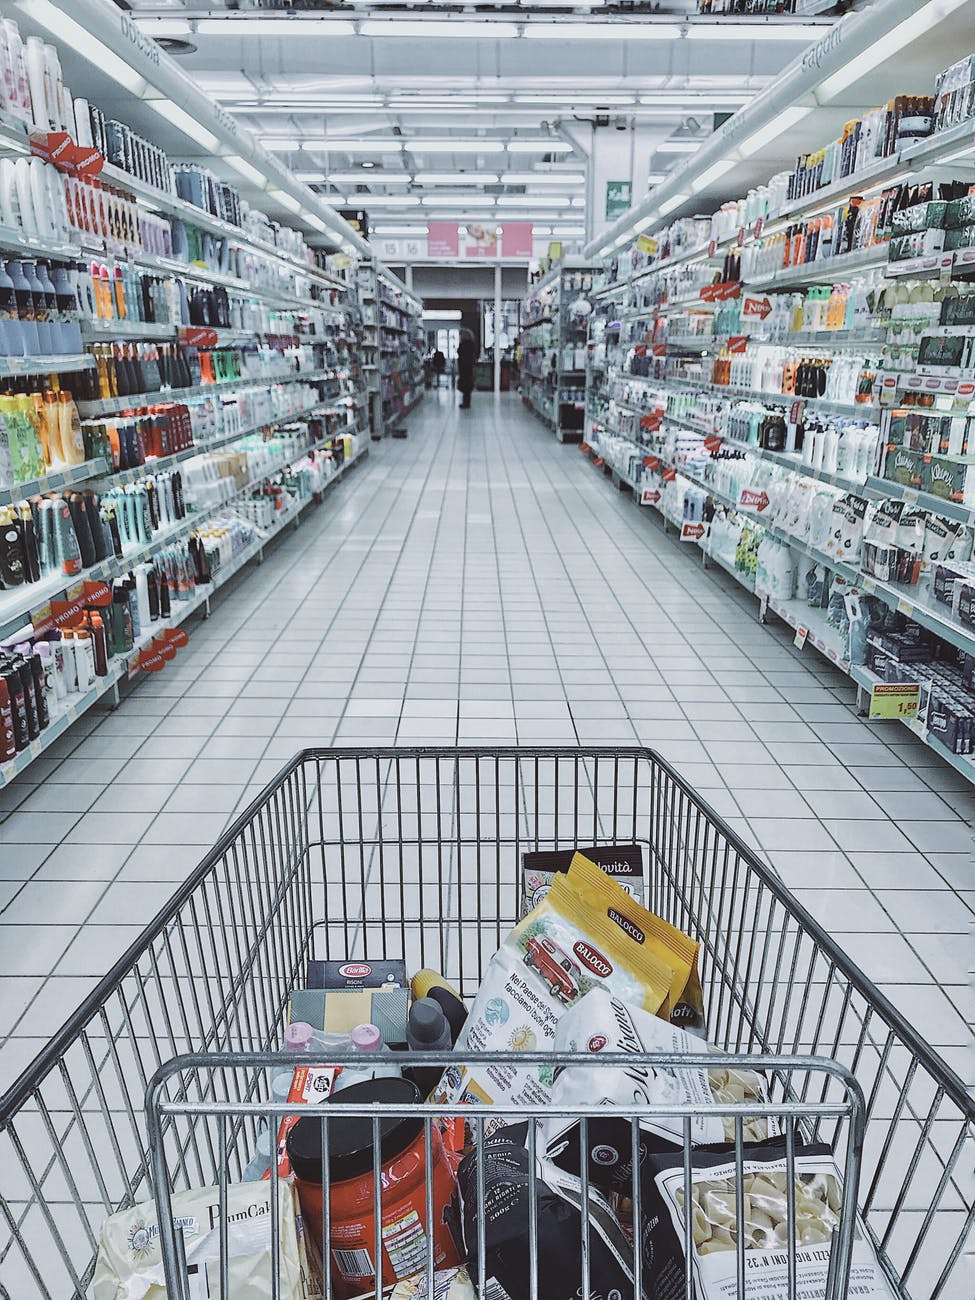 shopping cart with groceries